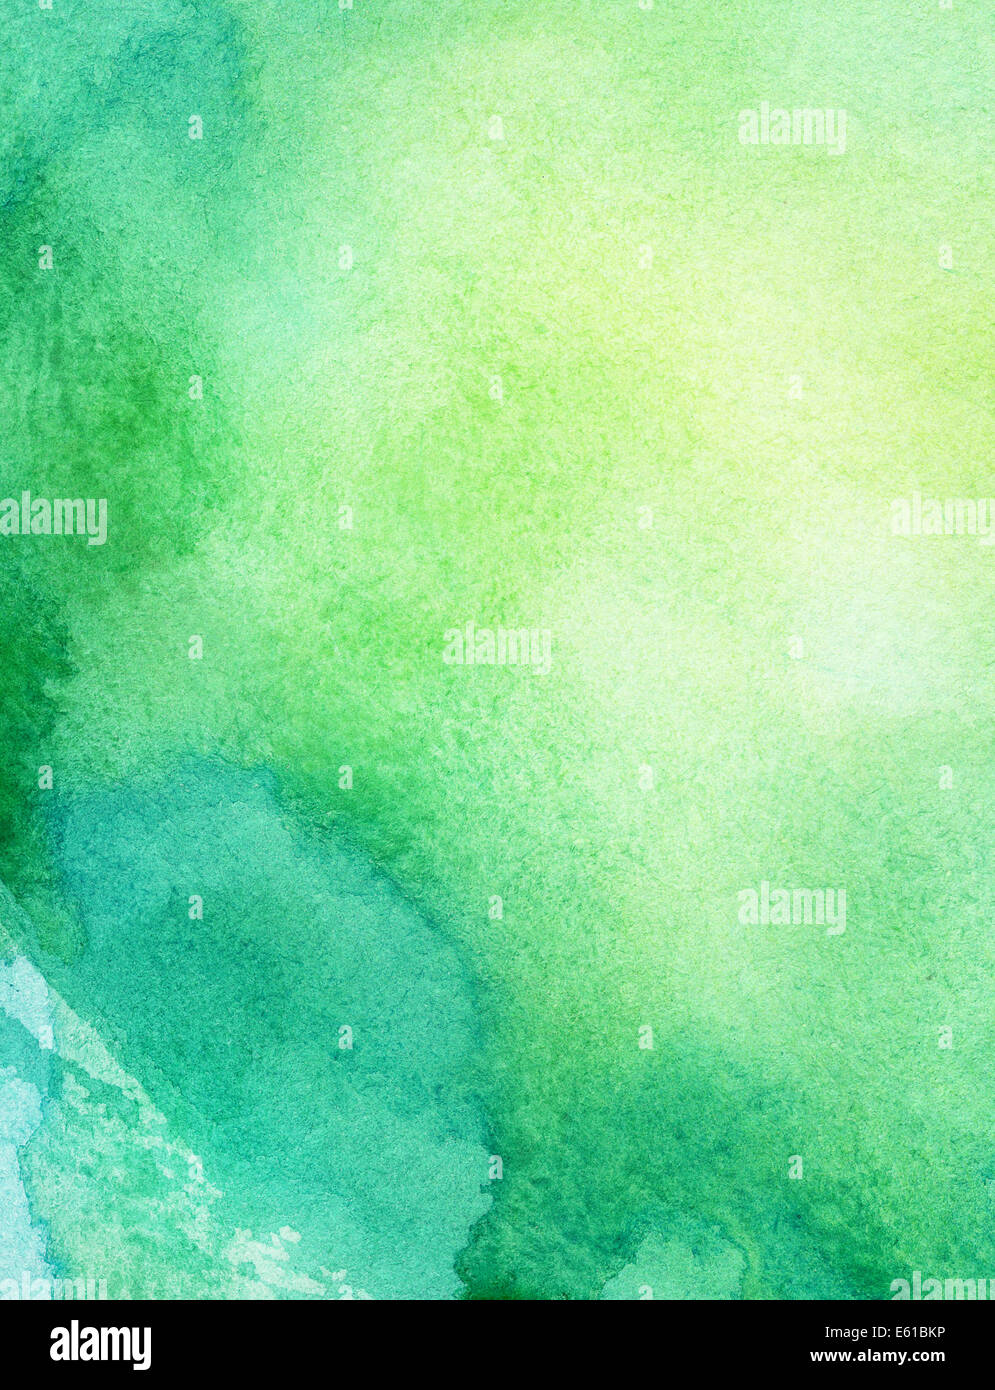 Watercolor grunge background Stock Photo